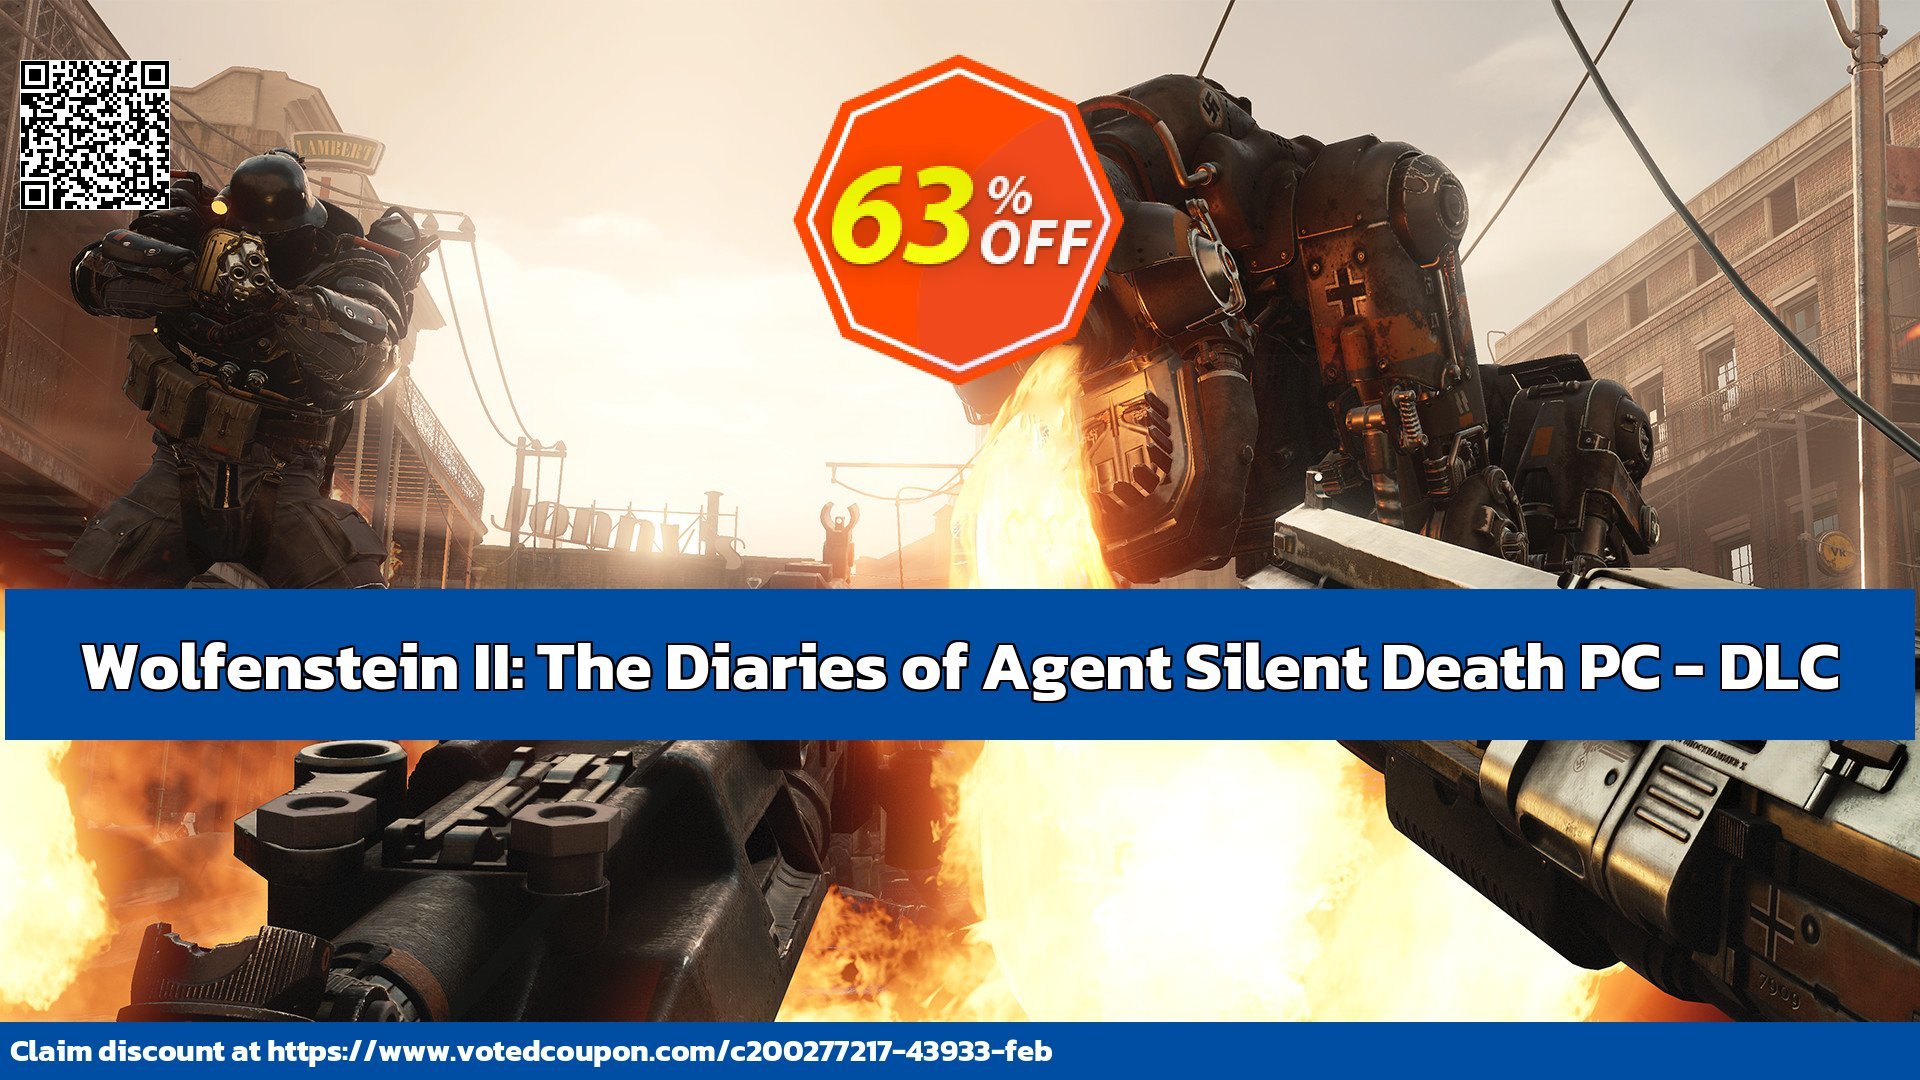 Wolfenstein II: The Diaries of Agent Silent Death PC - DLC Coupon Code May 2024, 69% OFF - VotedCoupon